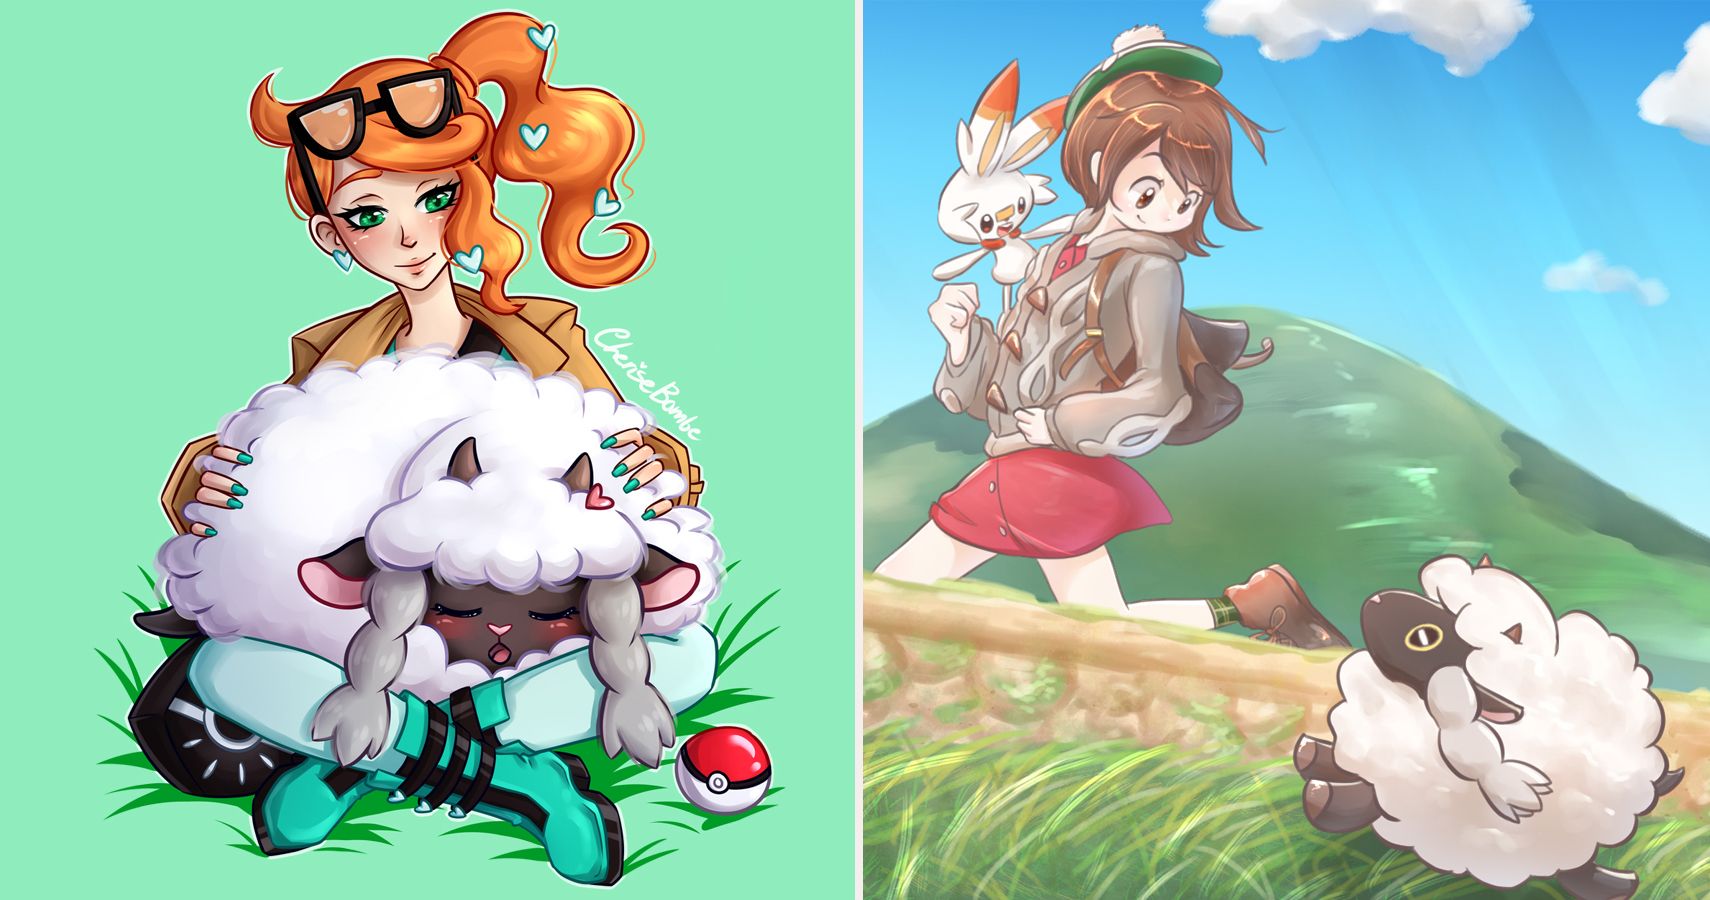 Pokémon Sword & Shield 10 Sonia and Wooloo Fan Art Drawings That Have Us Excited For The New Game